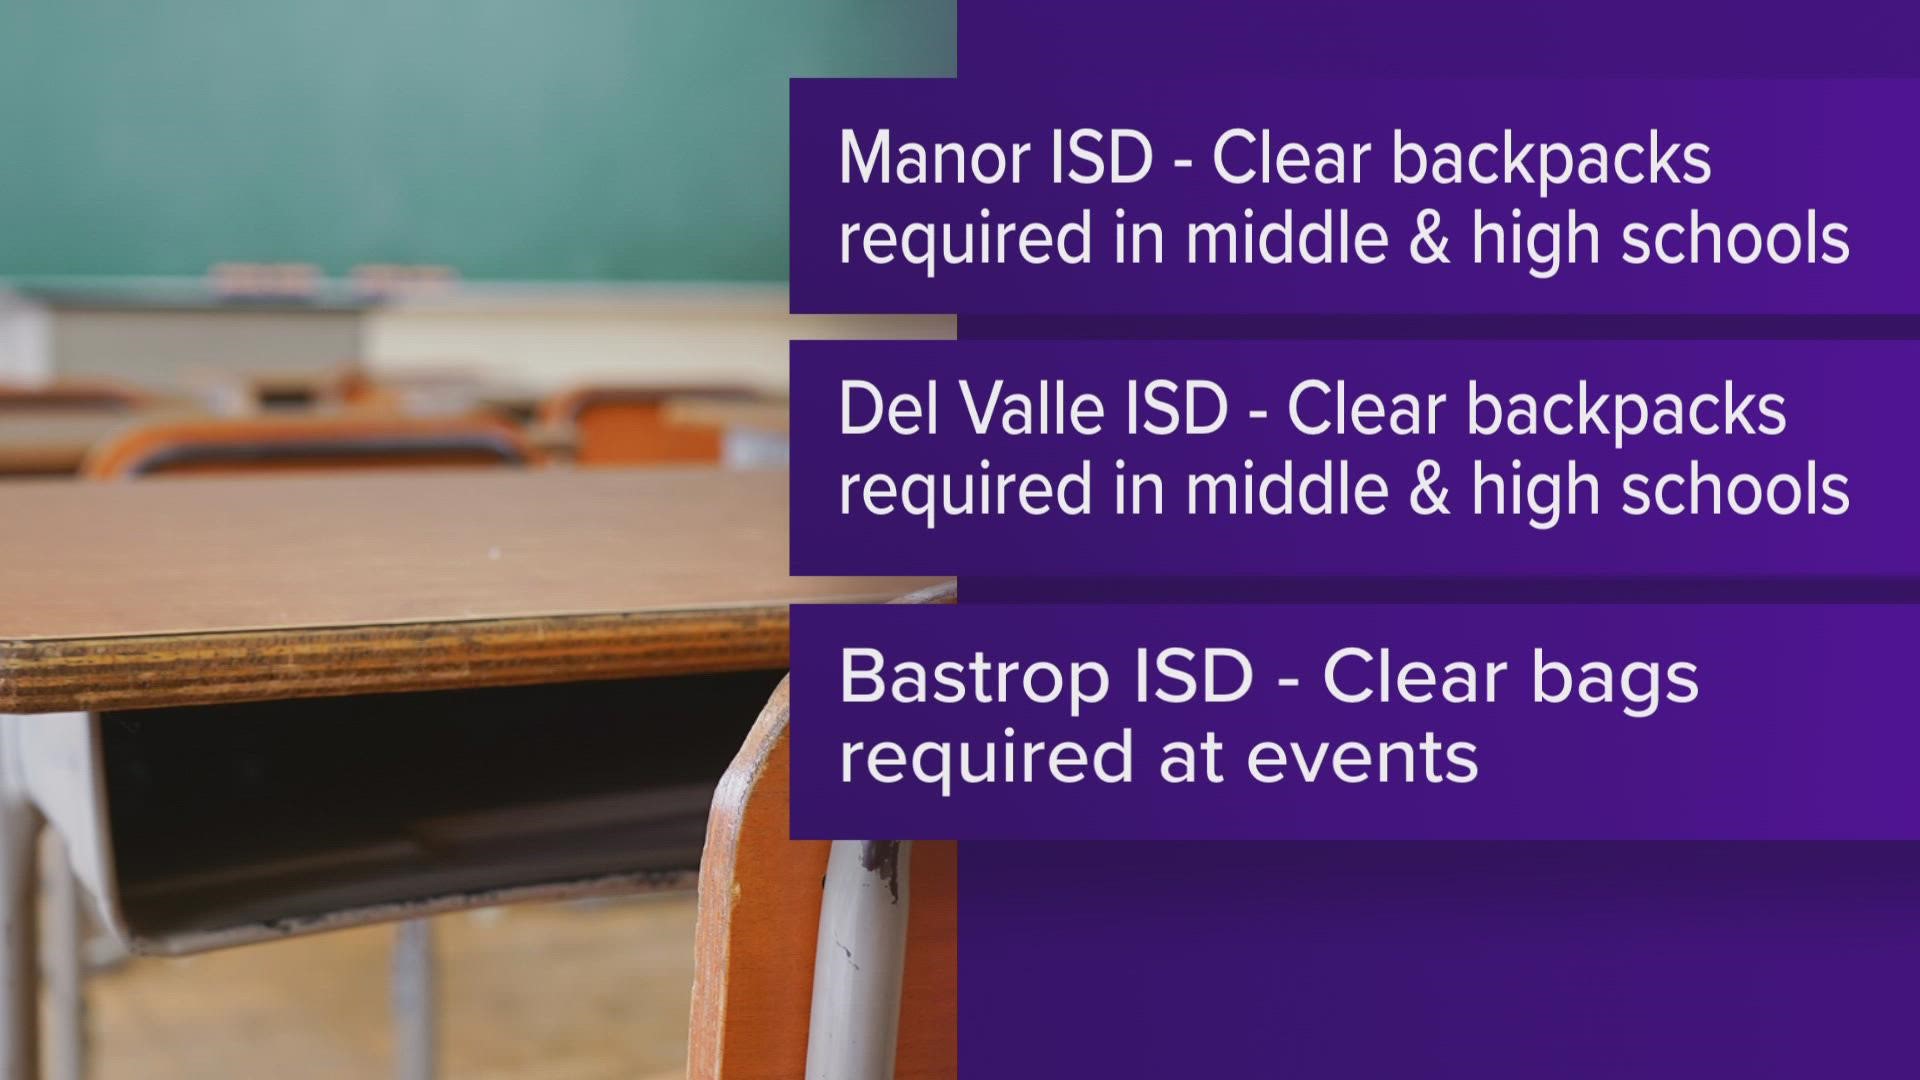 Bastrop ISD is the latest to implement the clear bag policy for the coming school year.